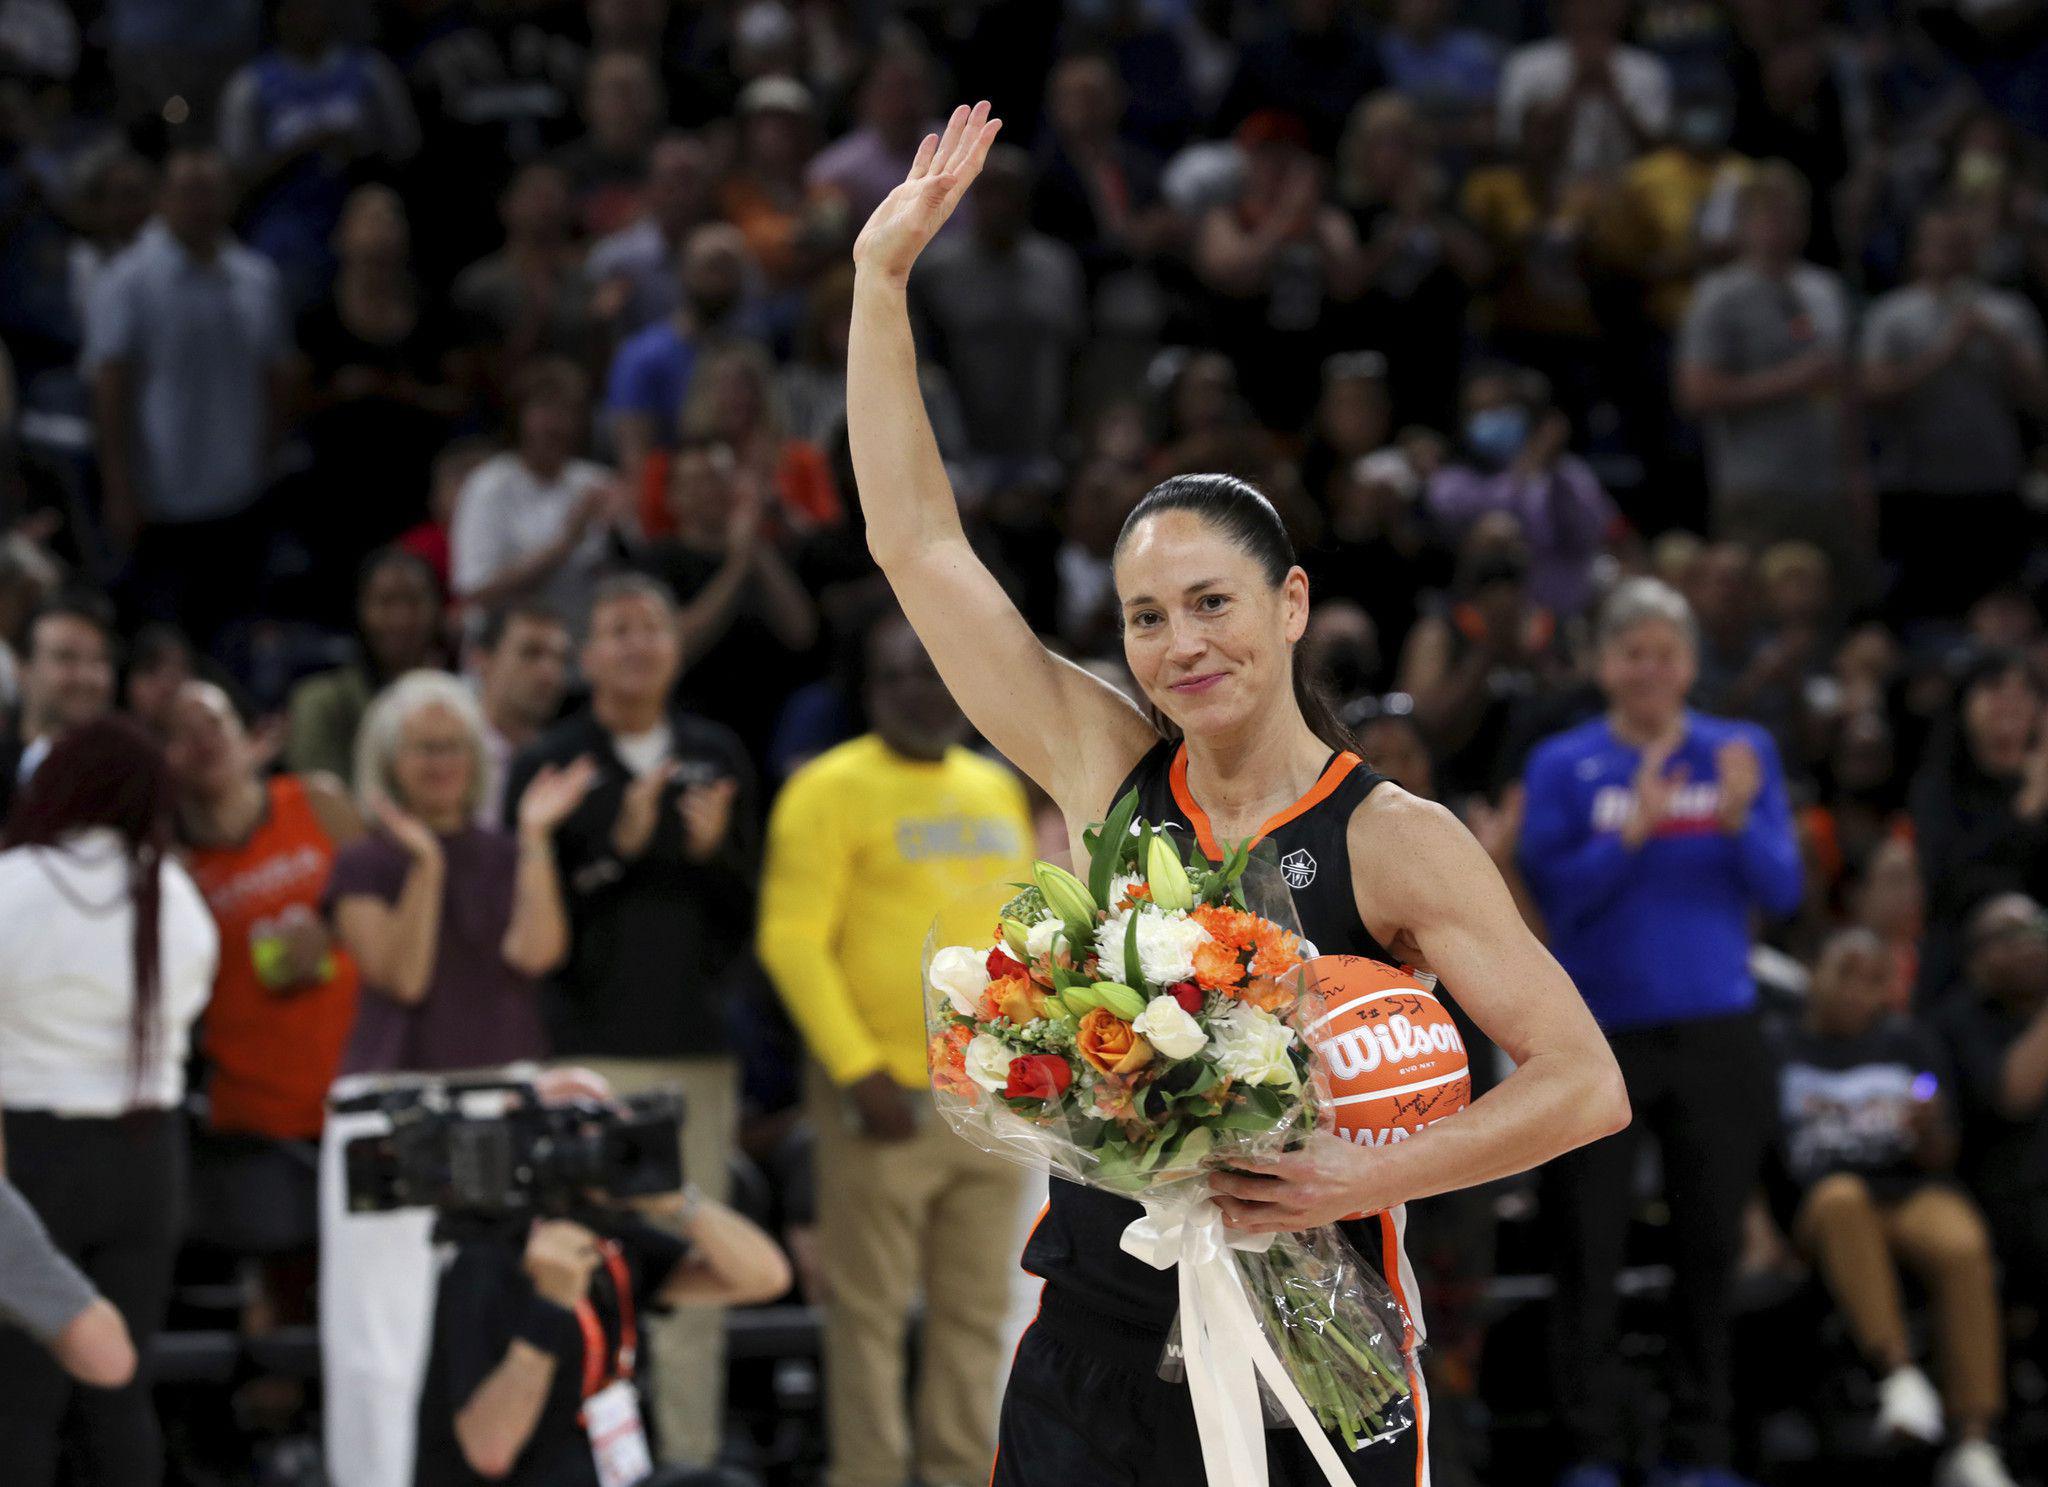 Geno Auriemma says Sue Bird earned her fame: 'You knew there was something unique about her' - CT Insider